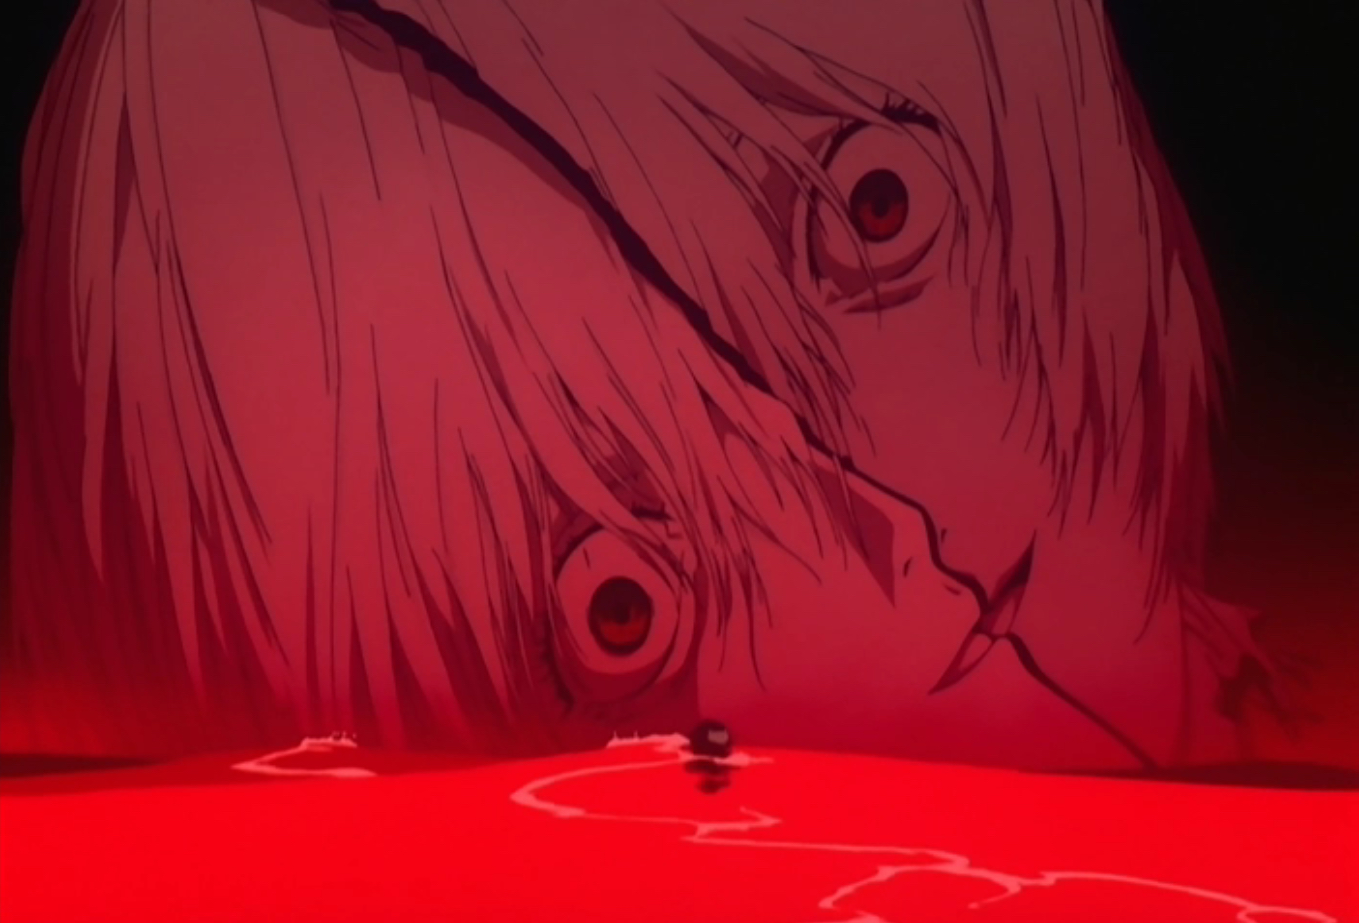 Top 15 Best Horror Anime on Funimation to Watch in 2023